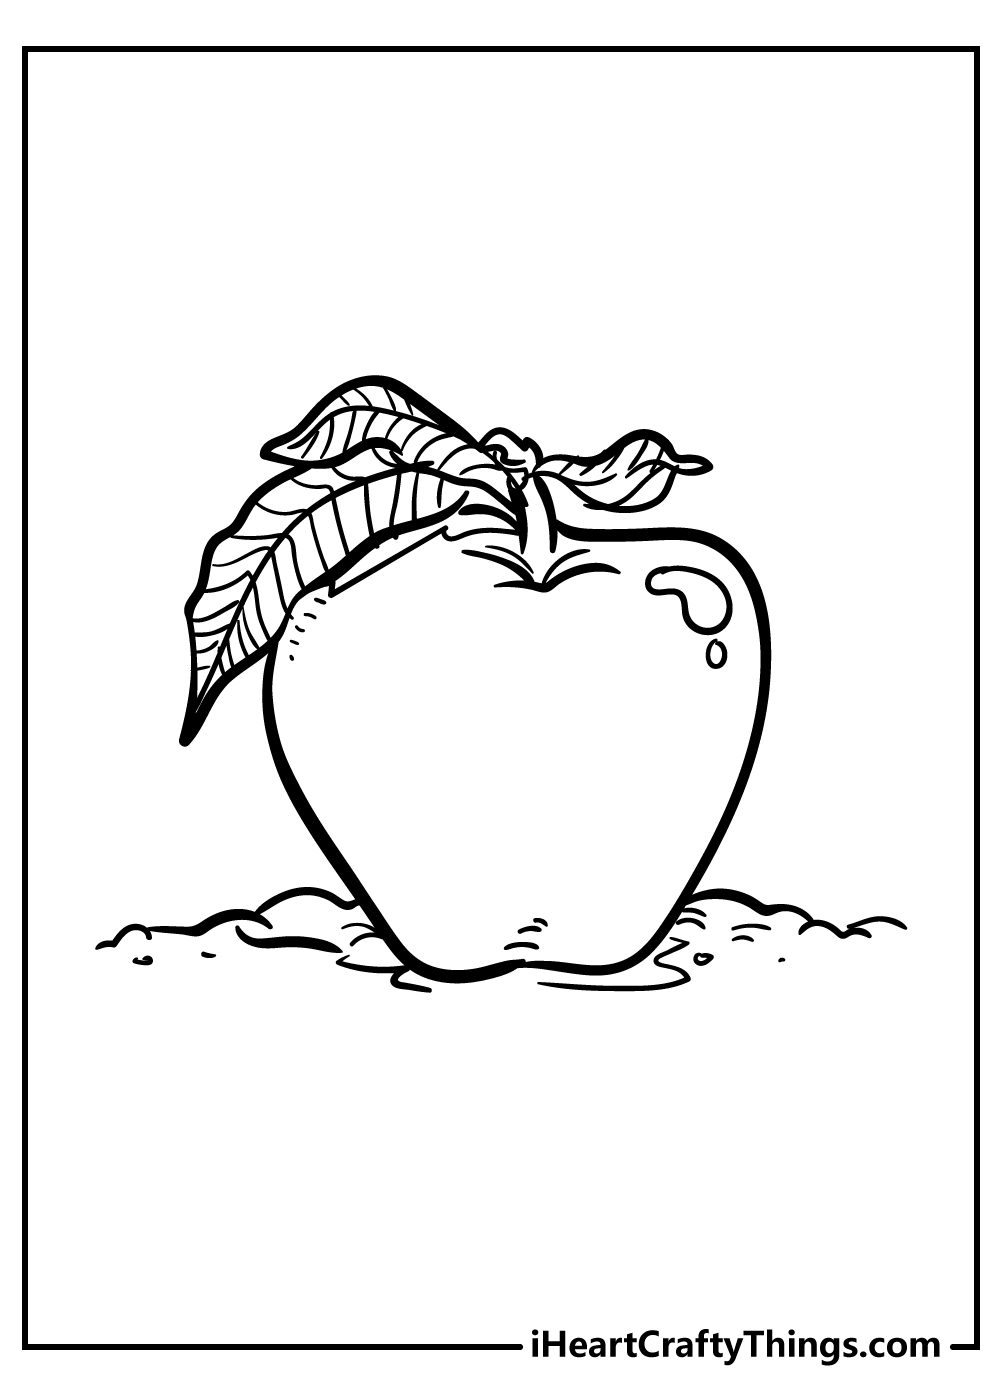 Apple Coloring book free printable for kids